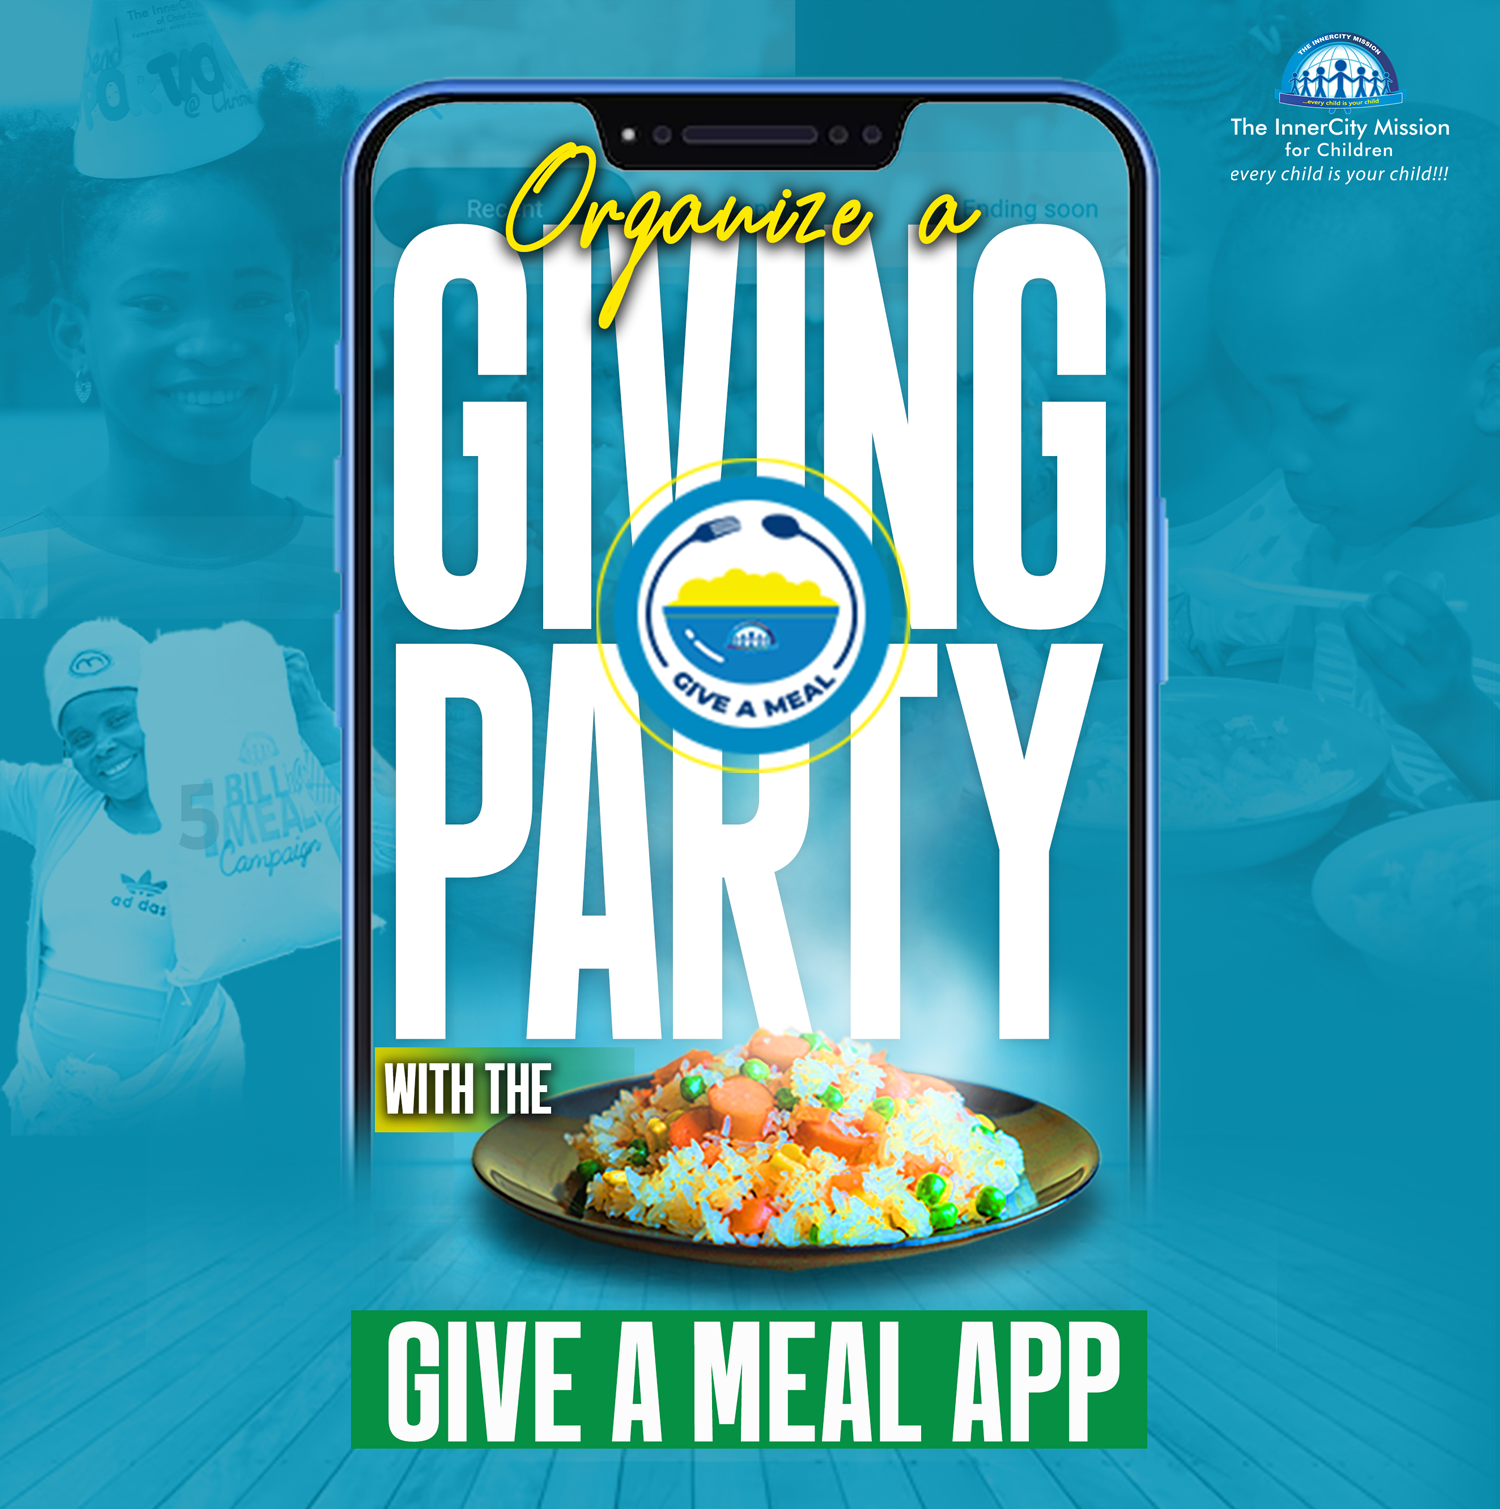 Celebrate Giving with the Give A Meal App